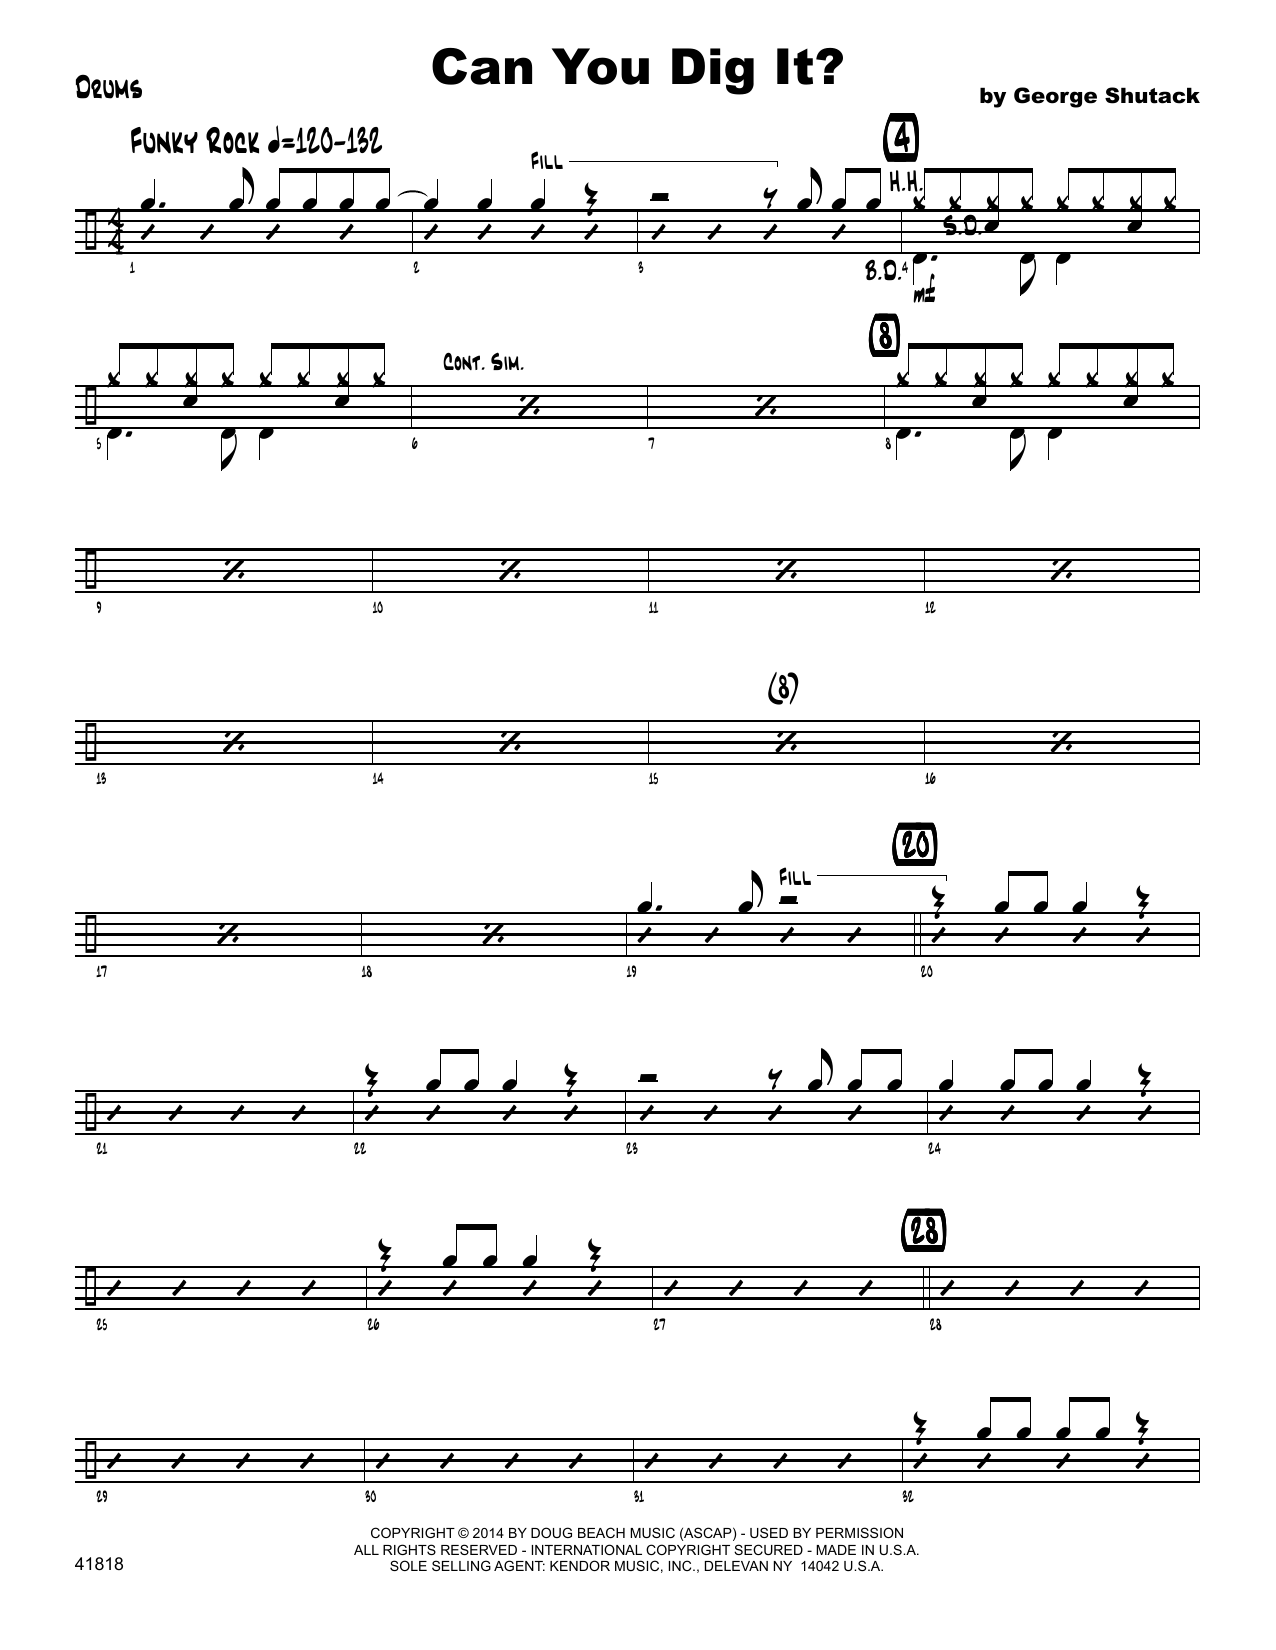 Download George Shutack Can You Dig It? - Drum Set Sheet Music